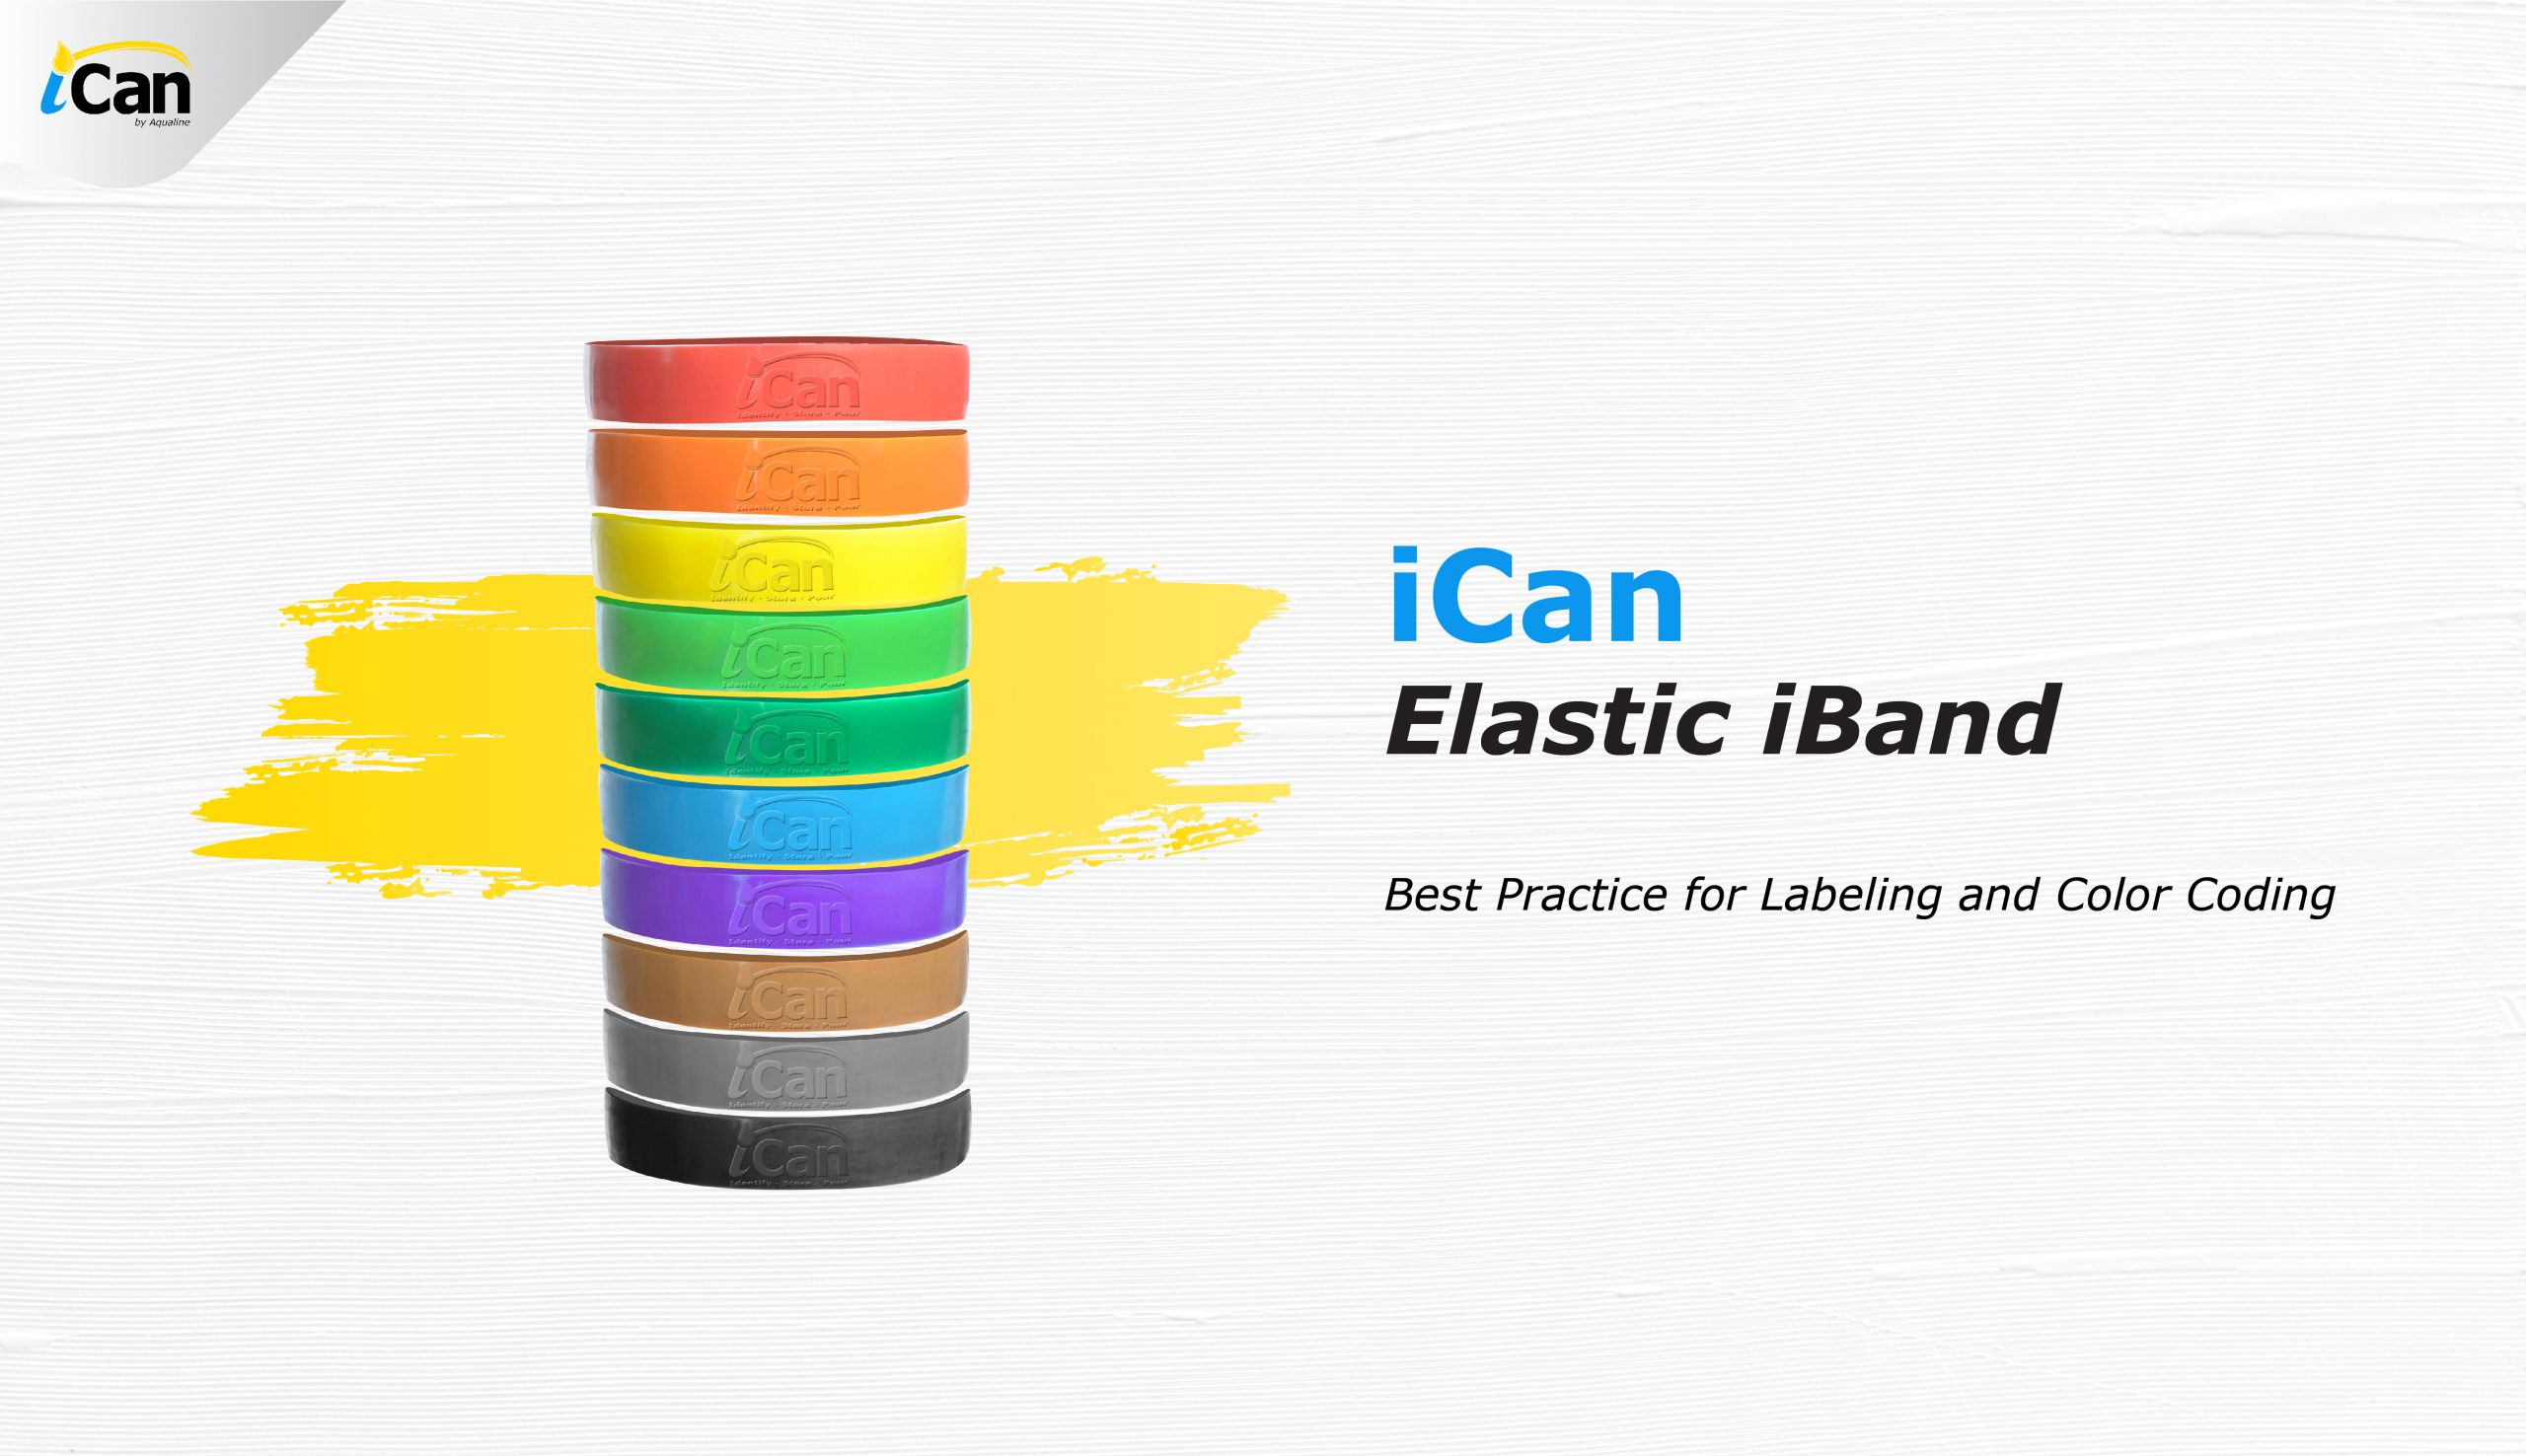 Best Practice for Labeling and Color Coding | Elastic iBand